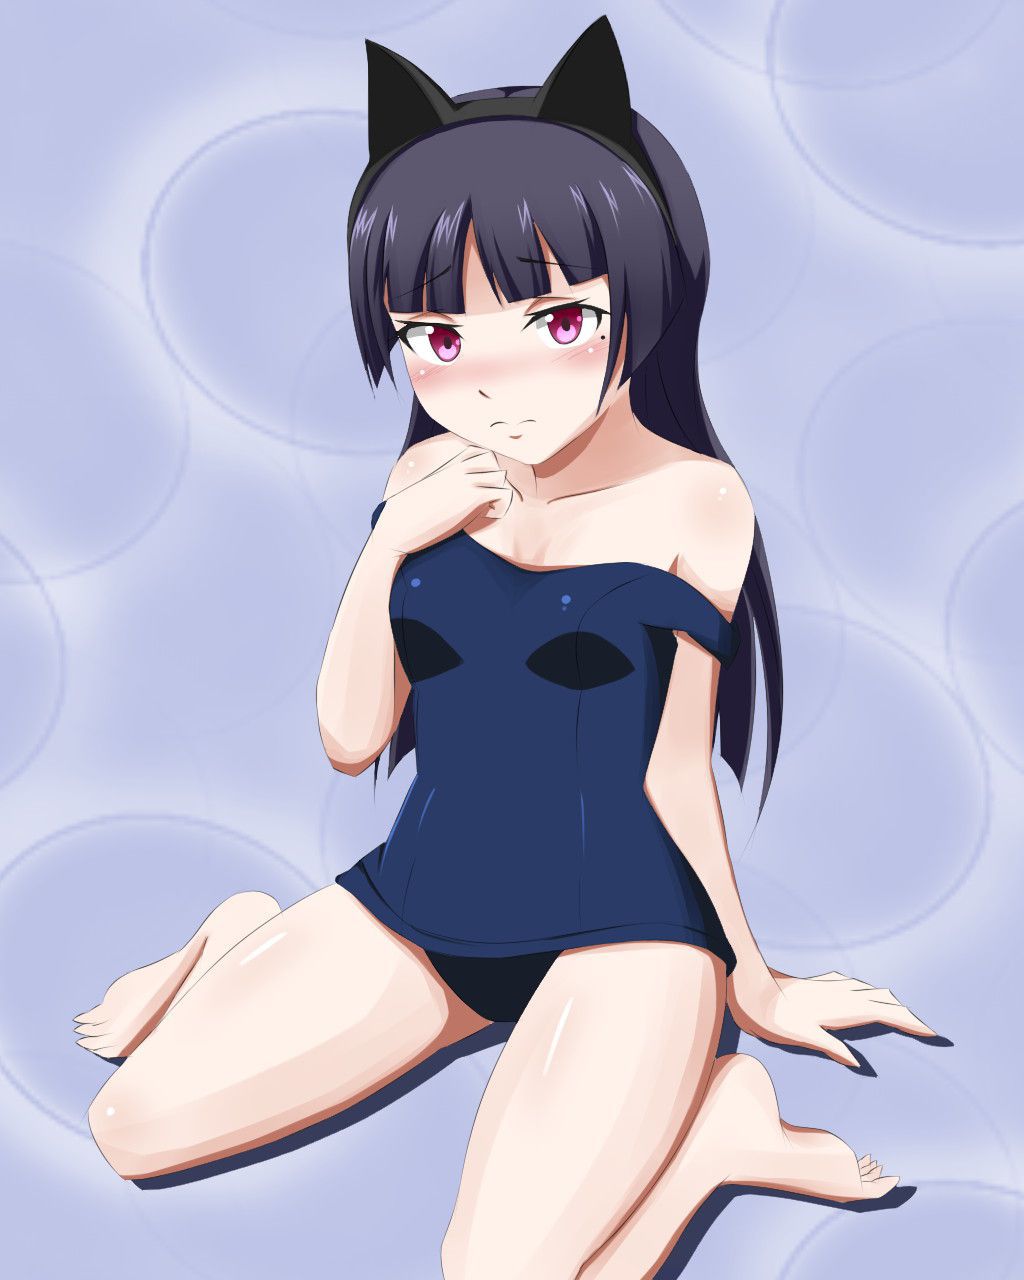 【2D】Please give me an erotic image because I want to see the figure of a cute girl 8